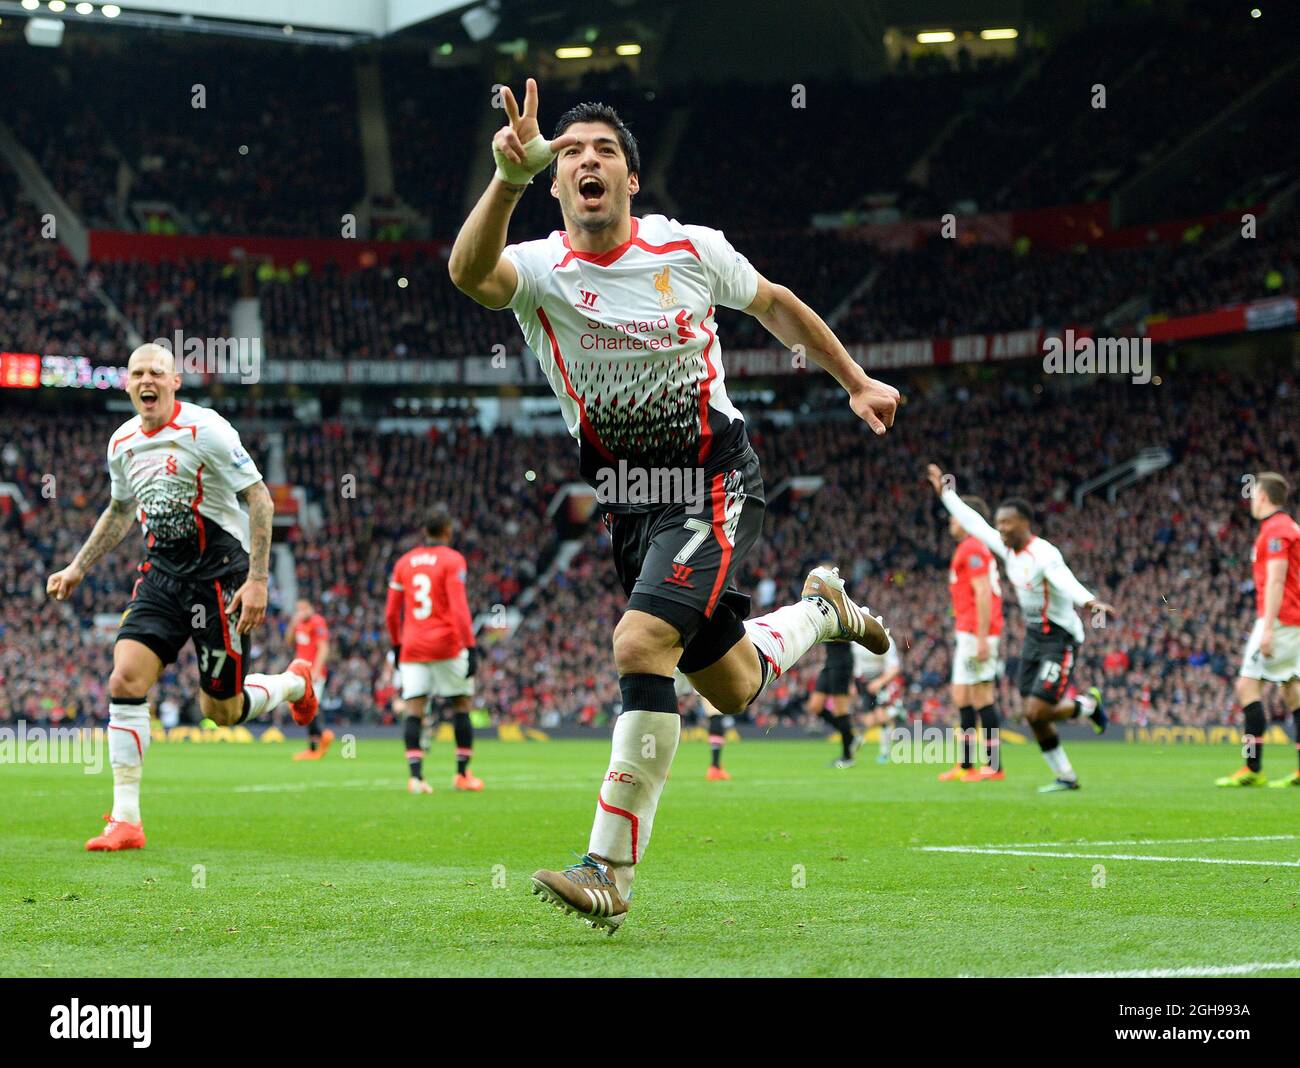 Luis Suarez of Liverpool celebrates scoring the third goal during the Barclays Premier League match between Manchester United and Liverpool held at the Old Trafford Stadium in Manchester, England on March 16, 2014. Pic Simon Bellis Stock Photo